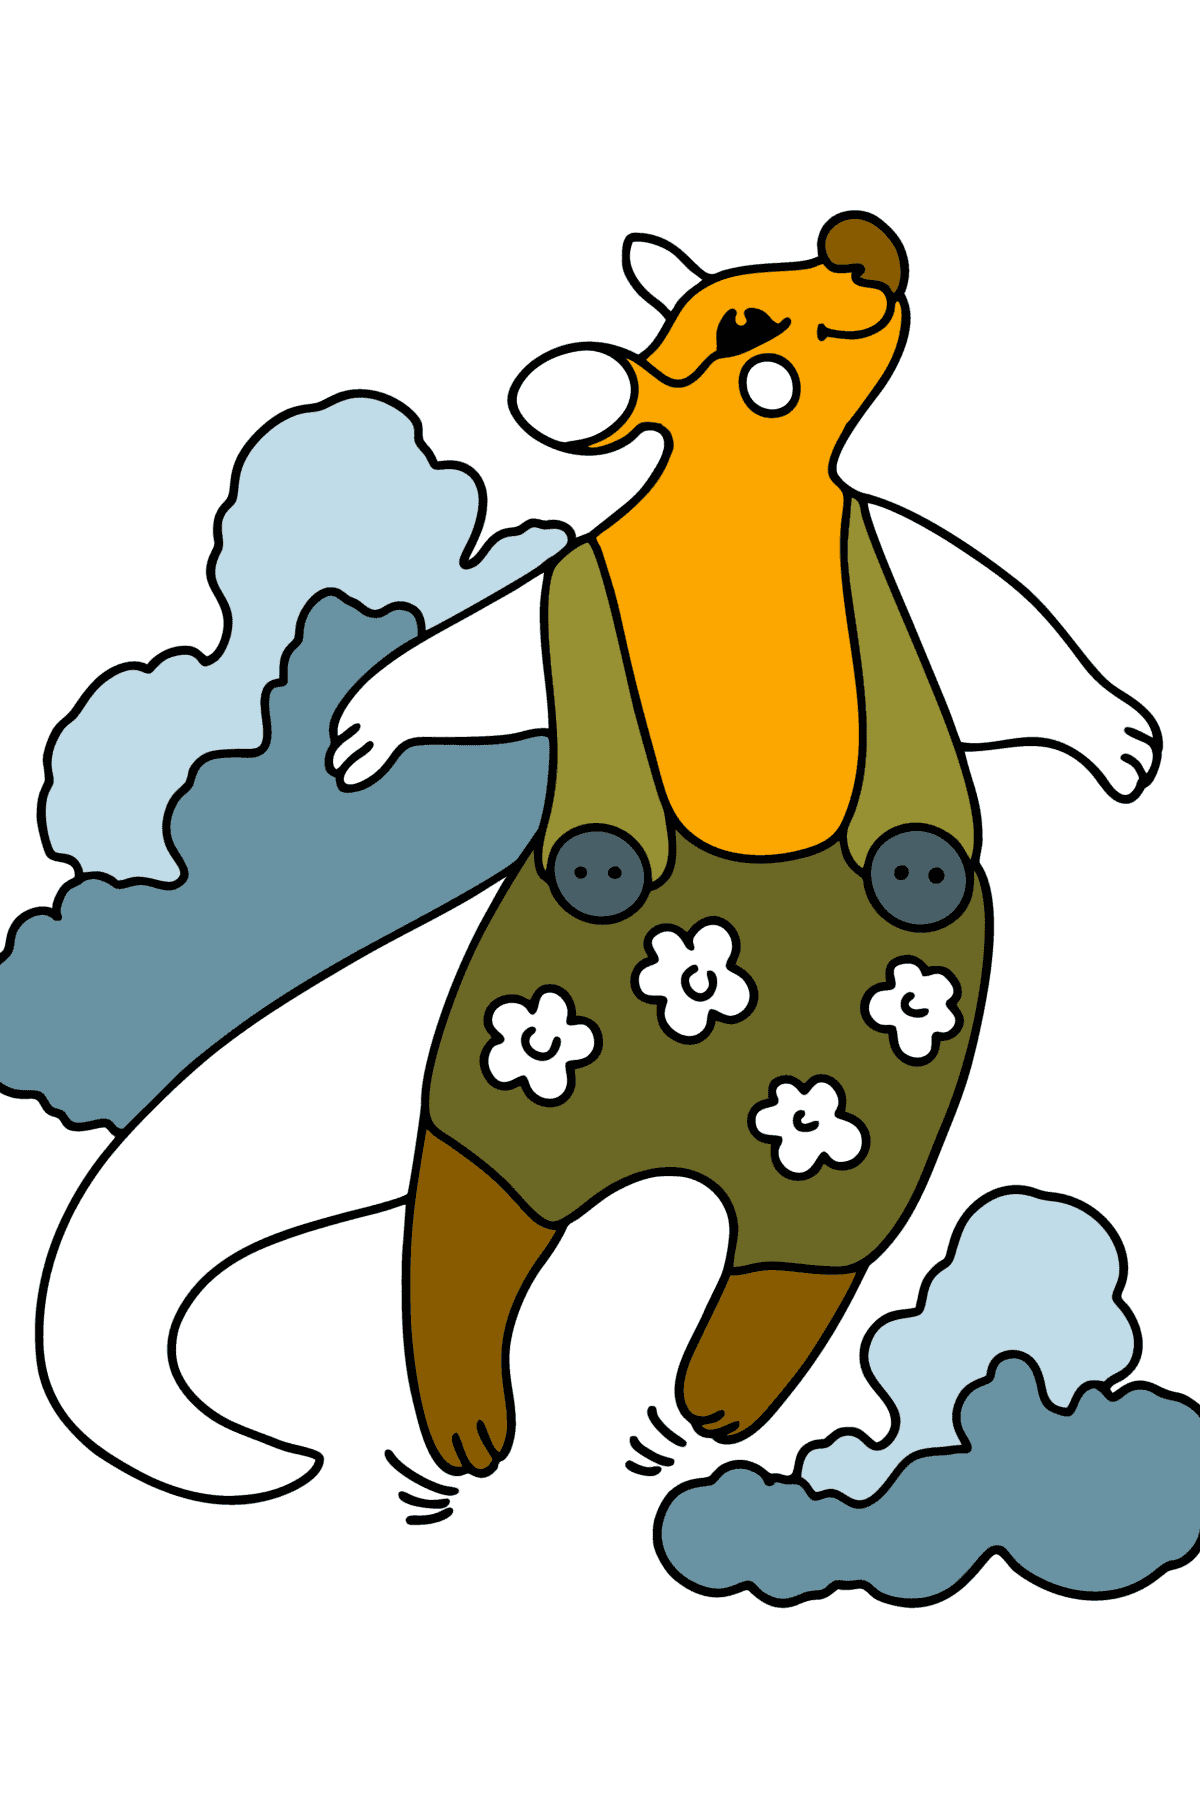 Coloring page - Cartoon Kangaroo jumping - Coloring Pages for Kids